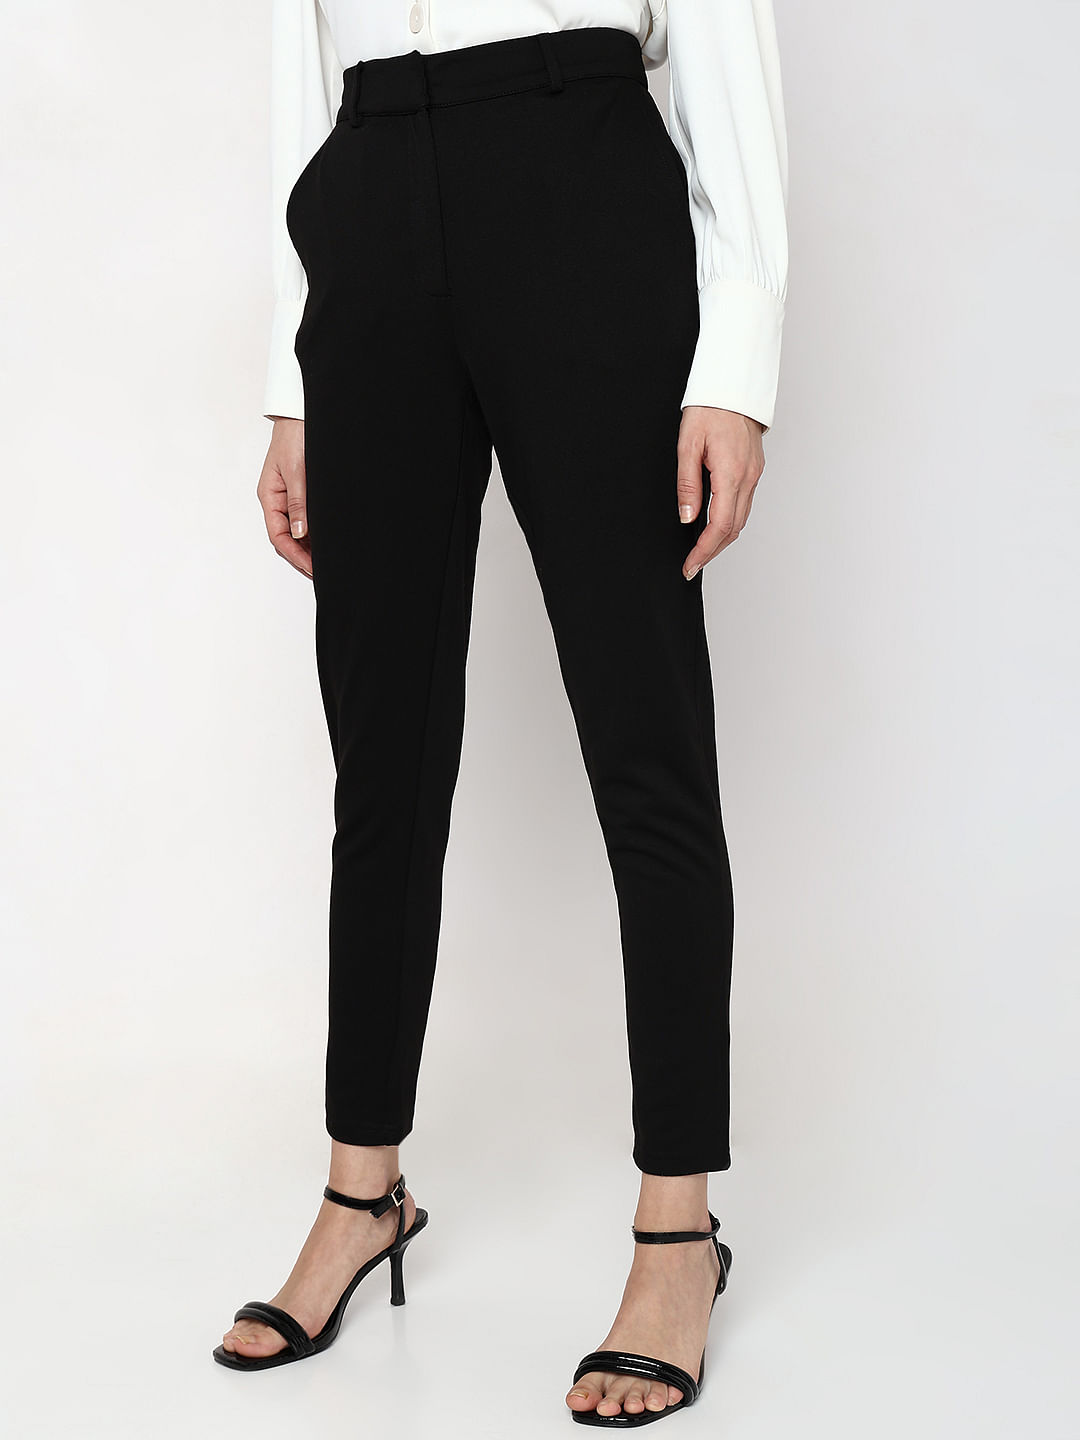 Women's Ultra Lux Comfort Slim Fit Ankle Pant